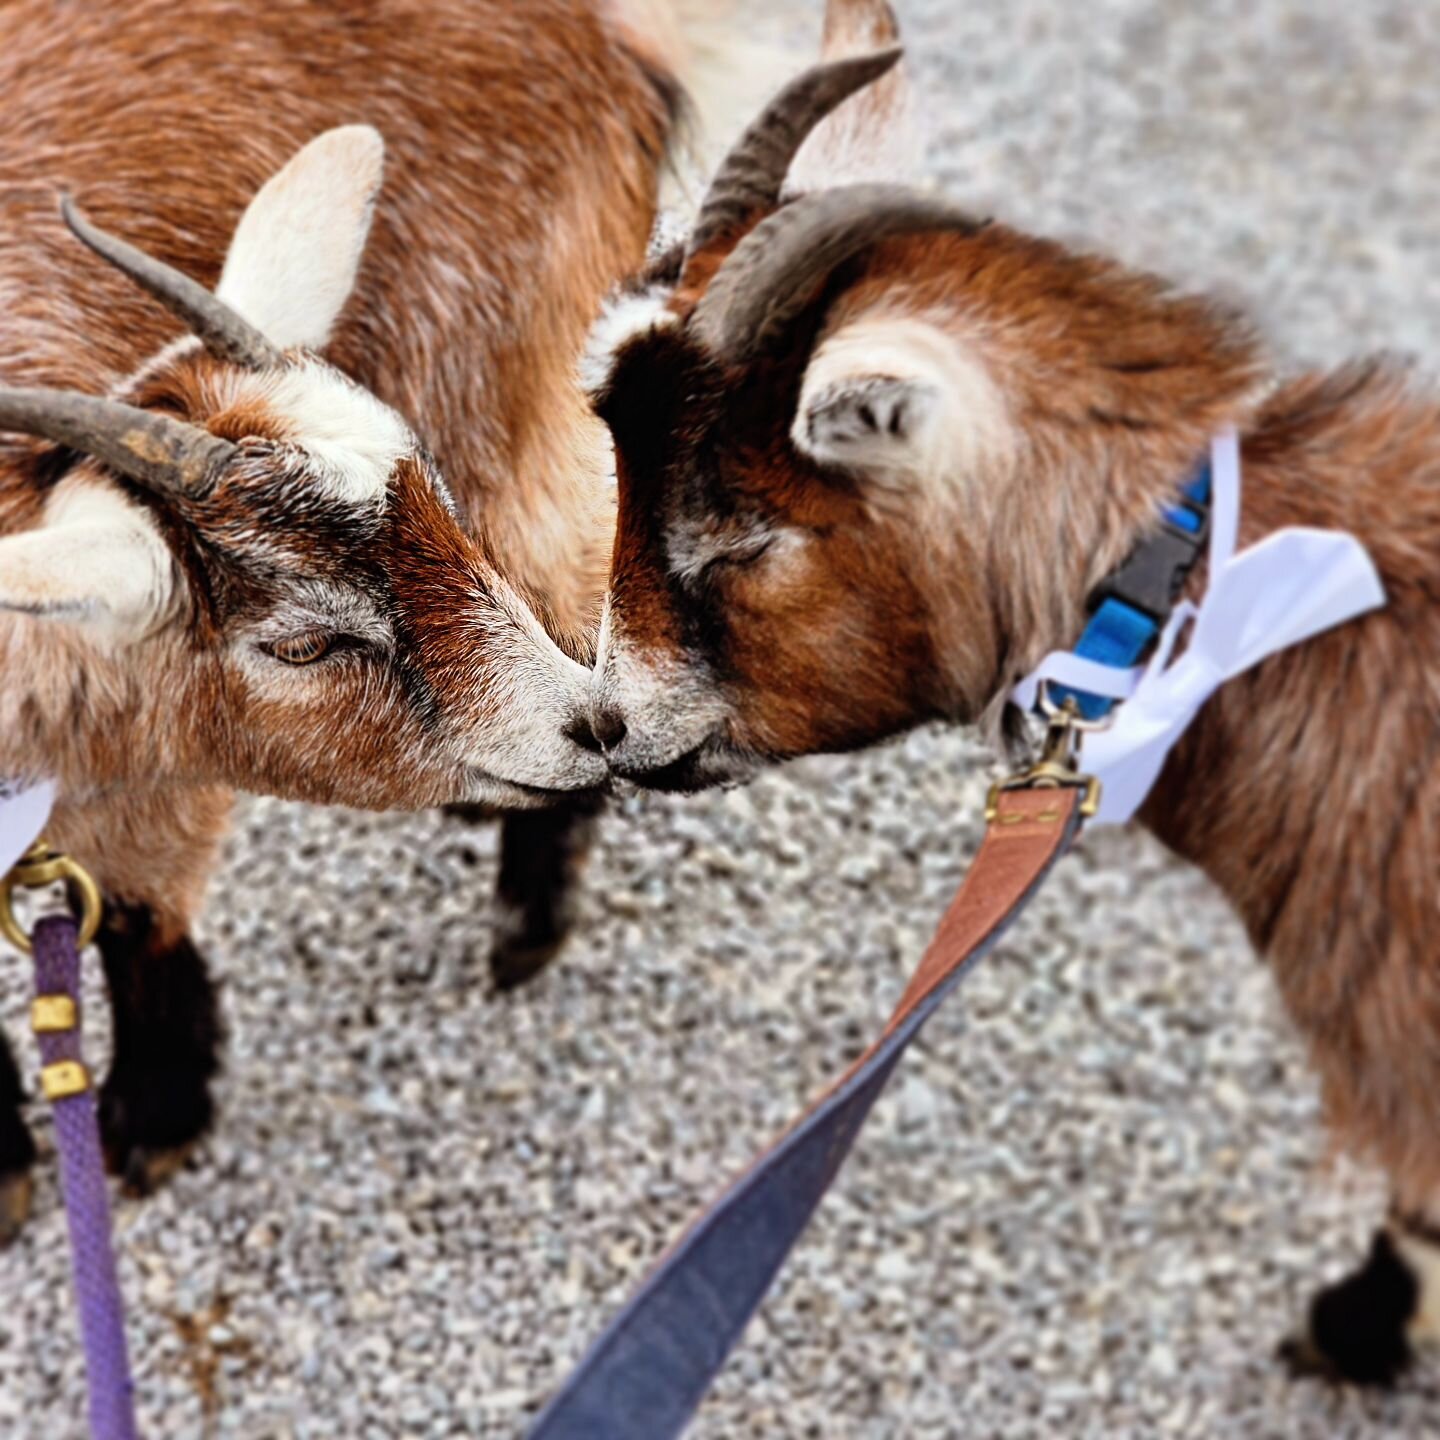 New Years Eve is the perfect time to get close with fluffy animals!
Our dynamic duo, Bonnie and Clyde are available for photo shoots and special events. 🥳 🐐